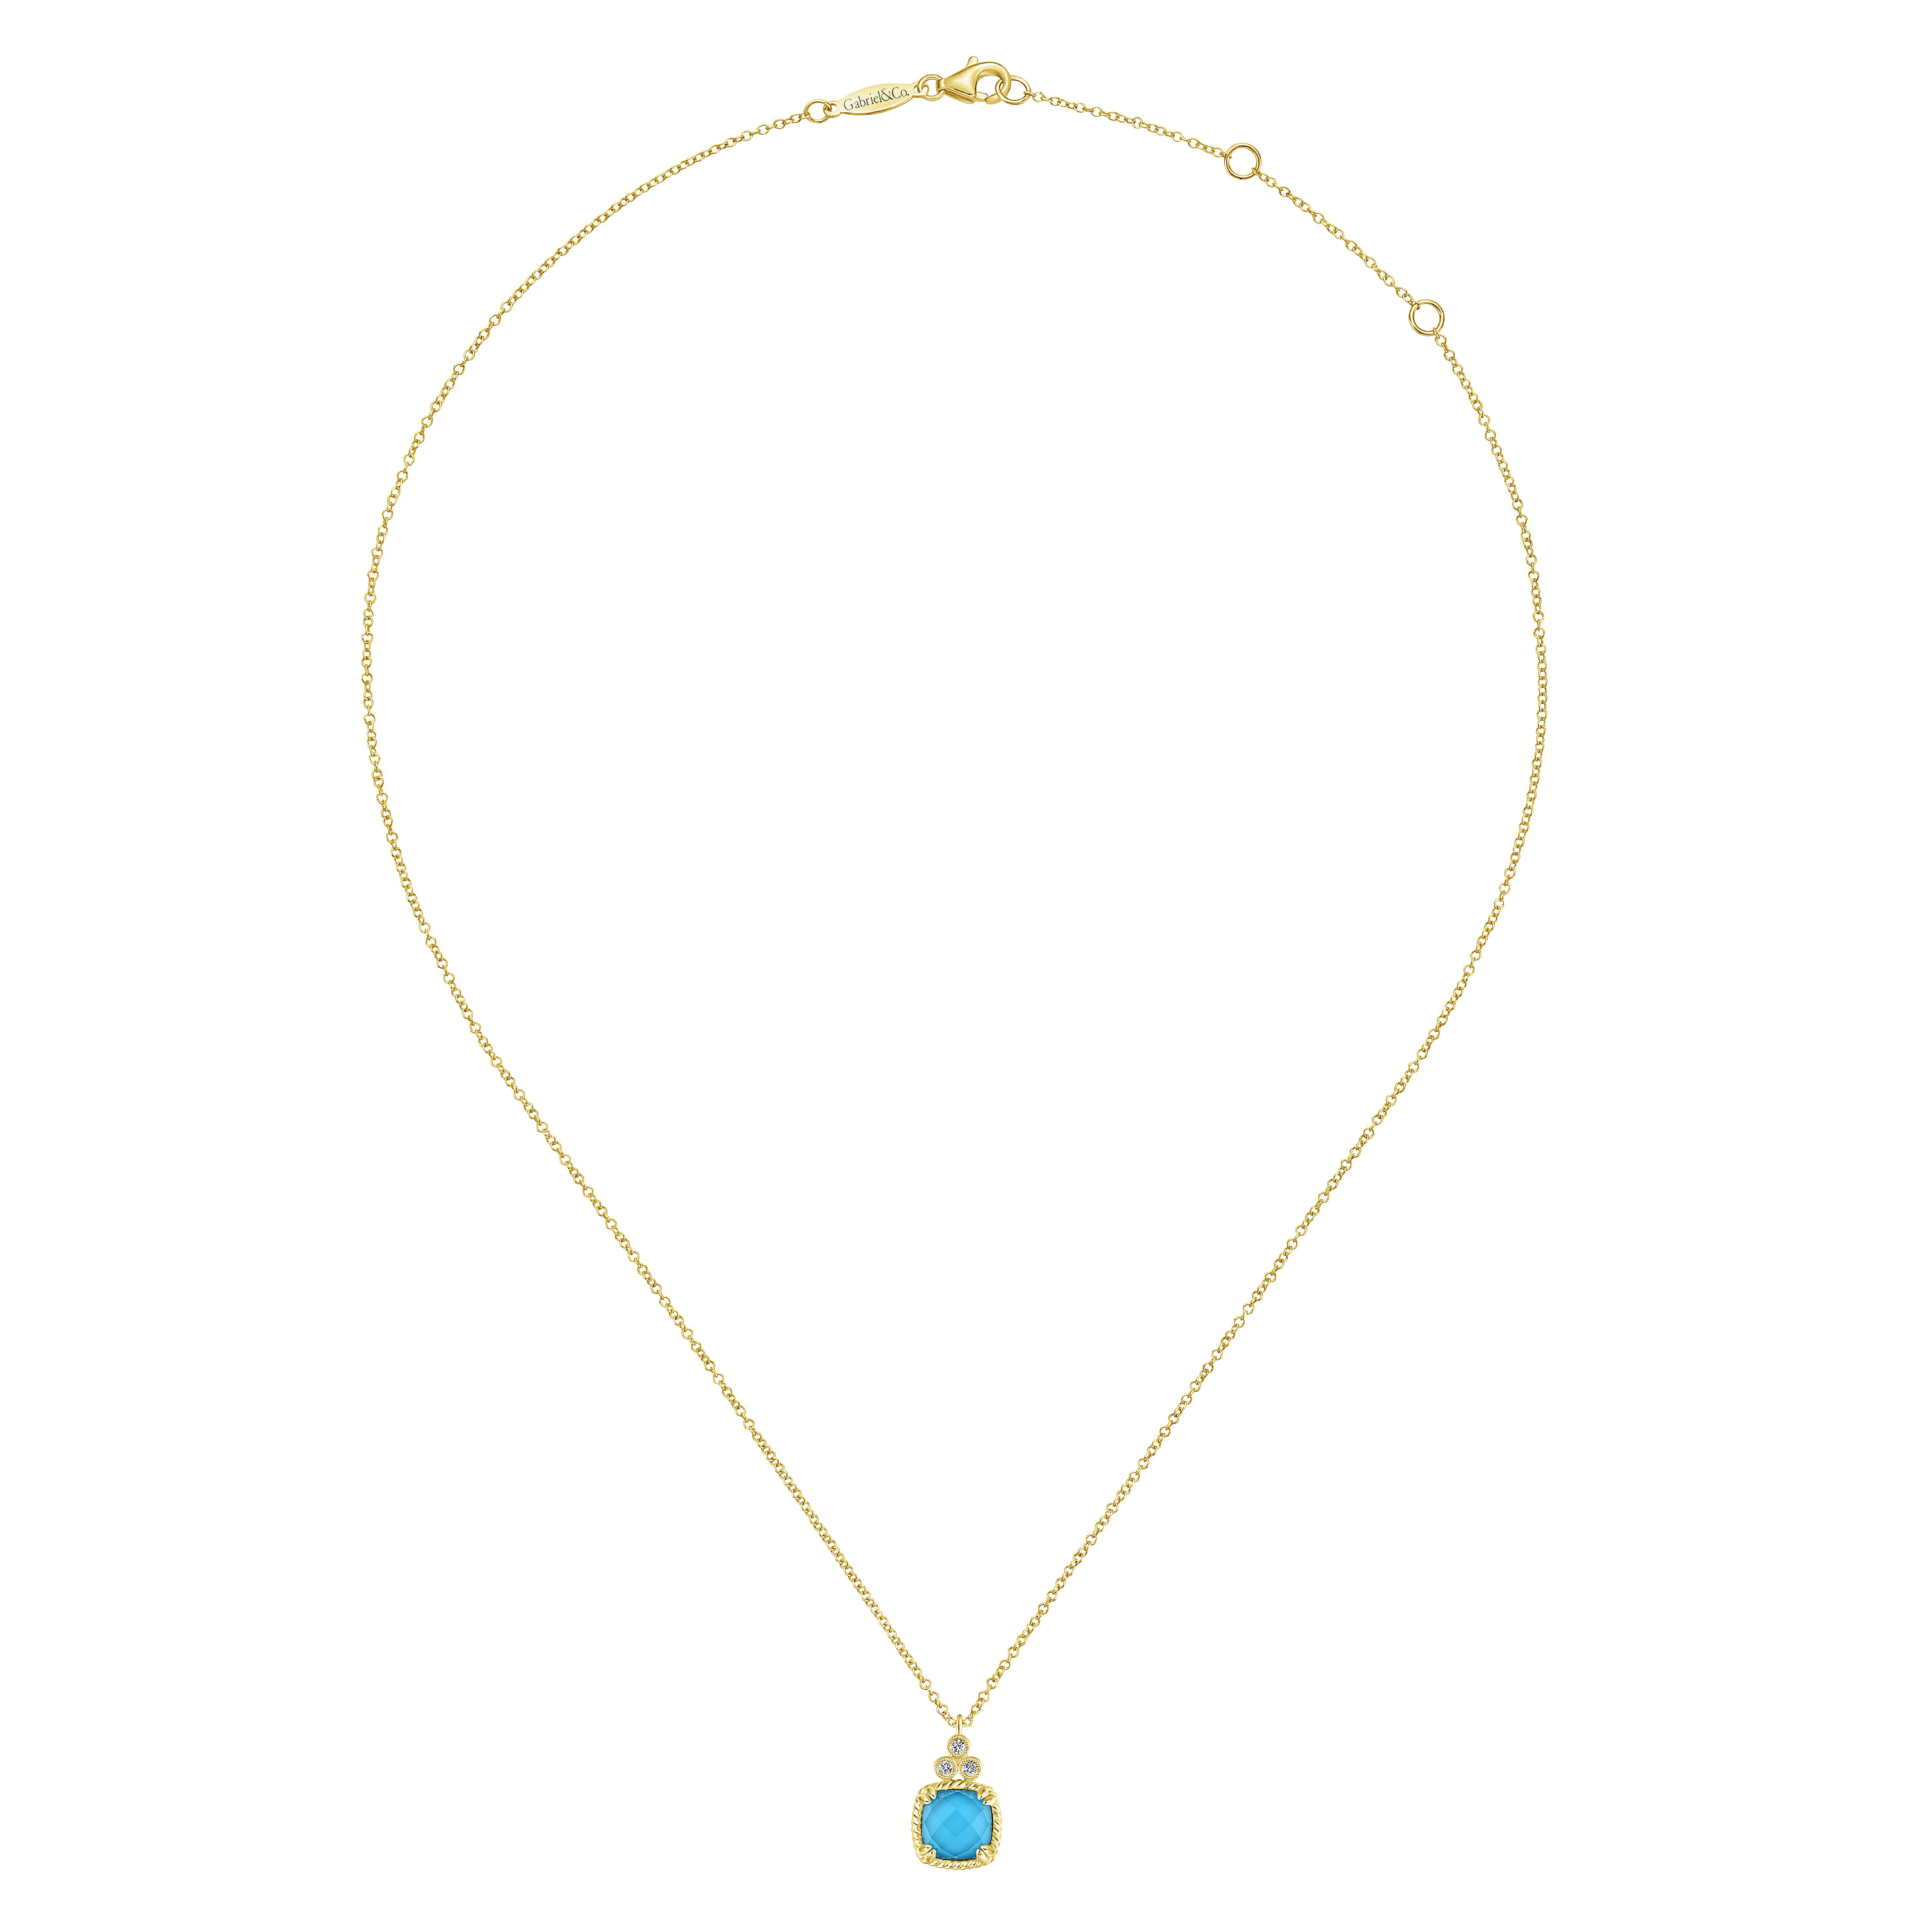 14K Yellow Gold Cushion Cut Rock Crystal/Turquoise and Diamond Pendant Necklace